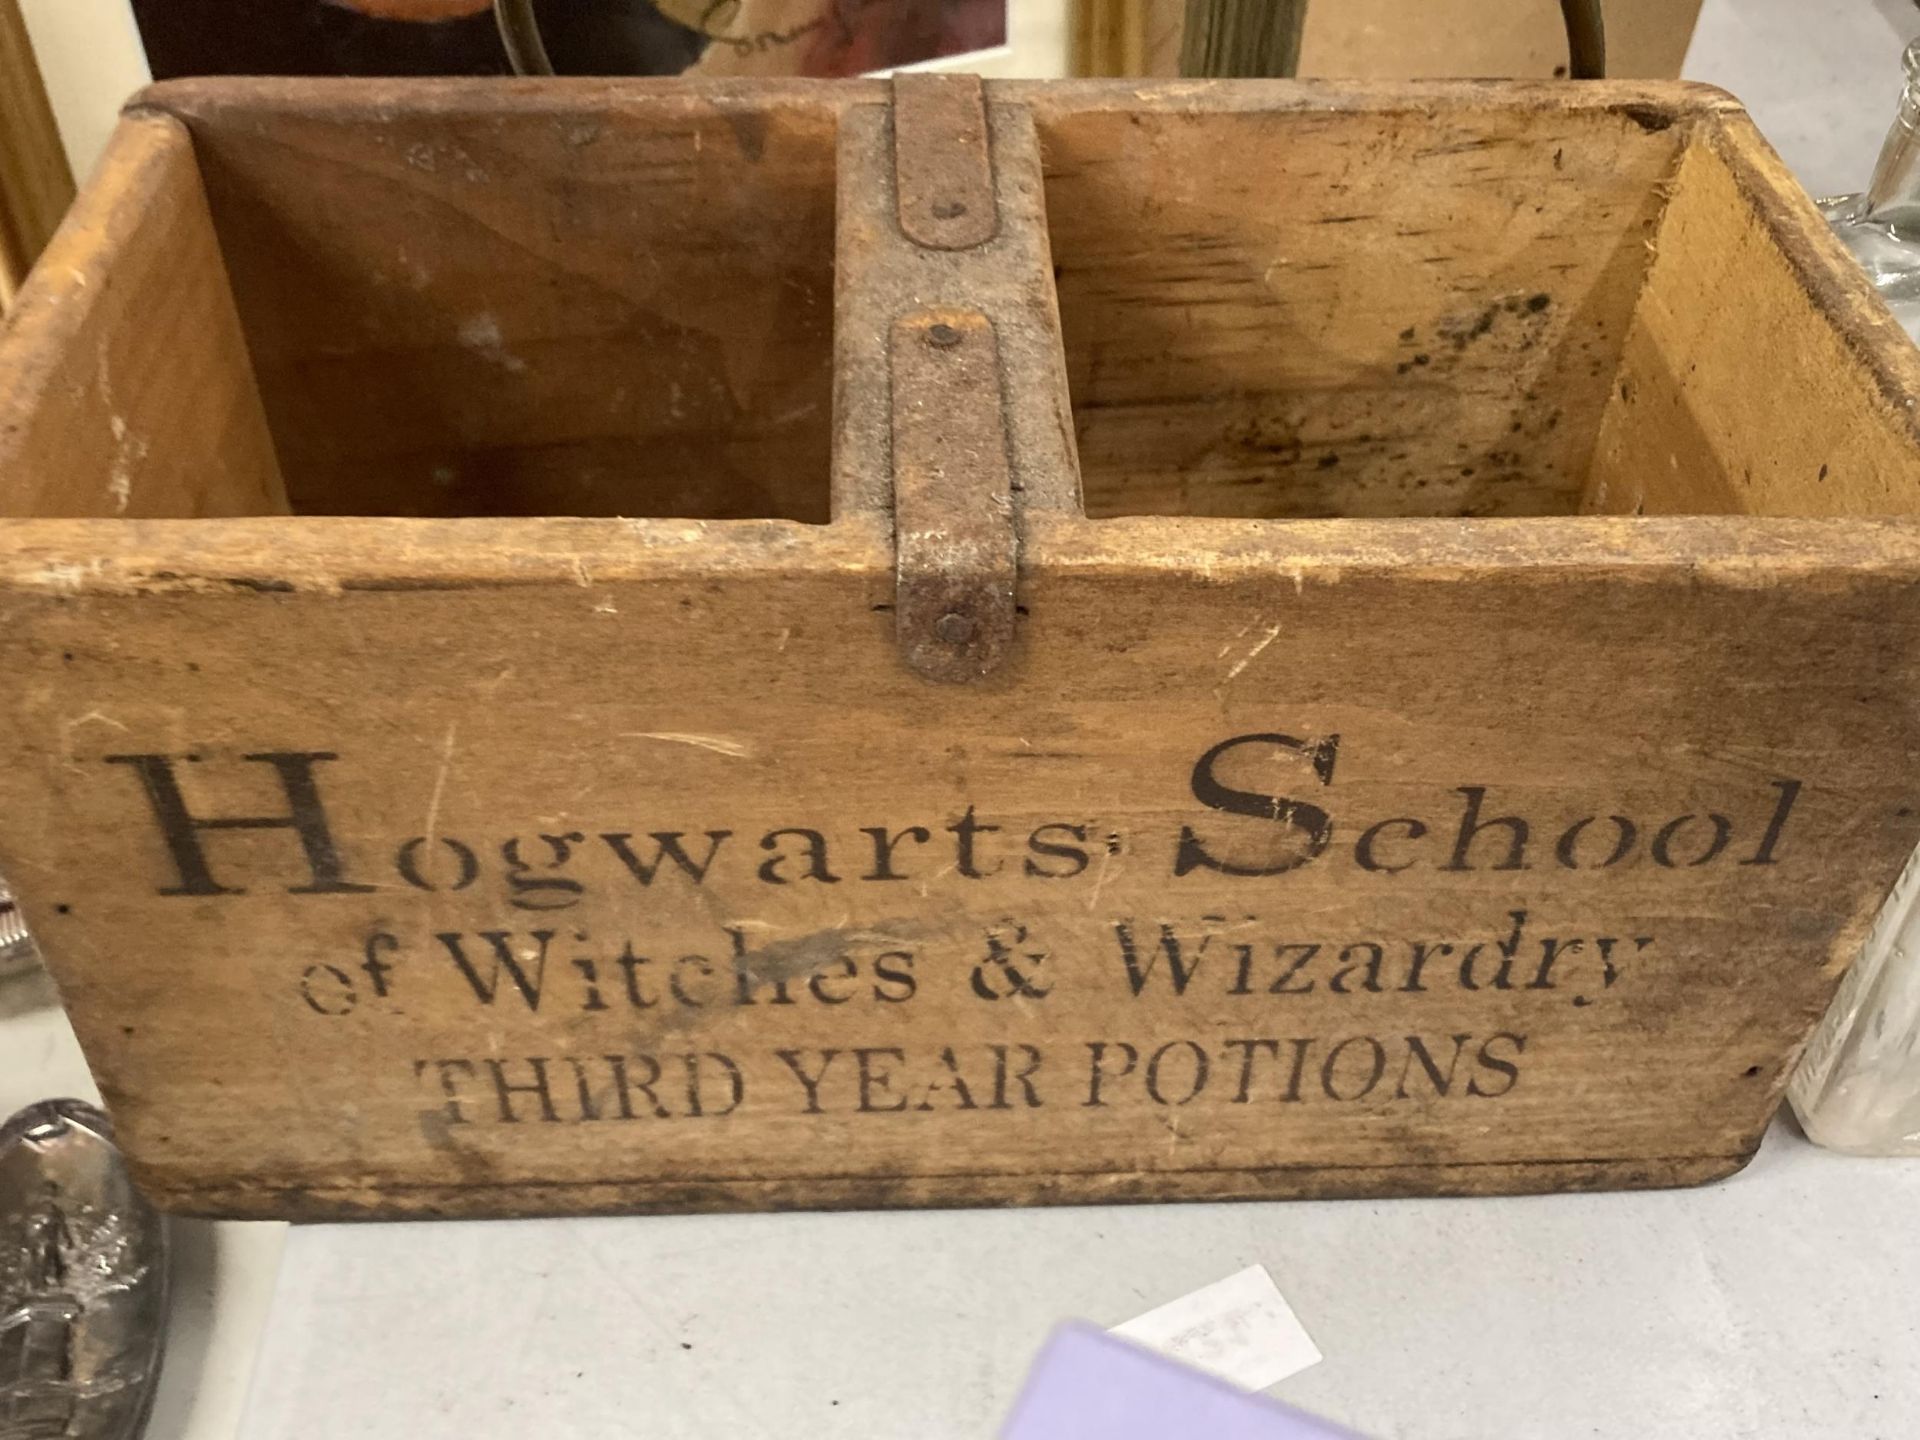 A HOGWARTS SCHOOL OF WITCHES AND WIZARDRY POTIONS AND SPELLS WOODEN BOX WITH THREE GLASS BOTTLES - Image 3 of 4